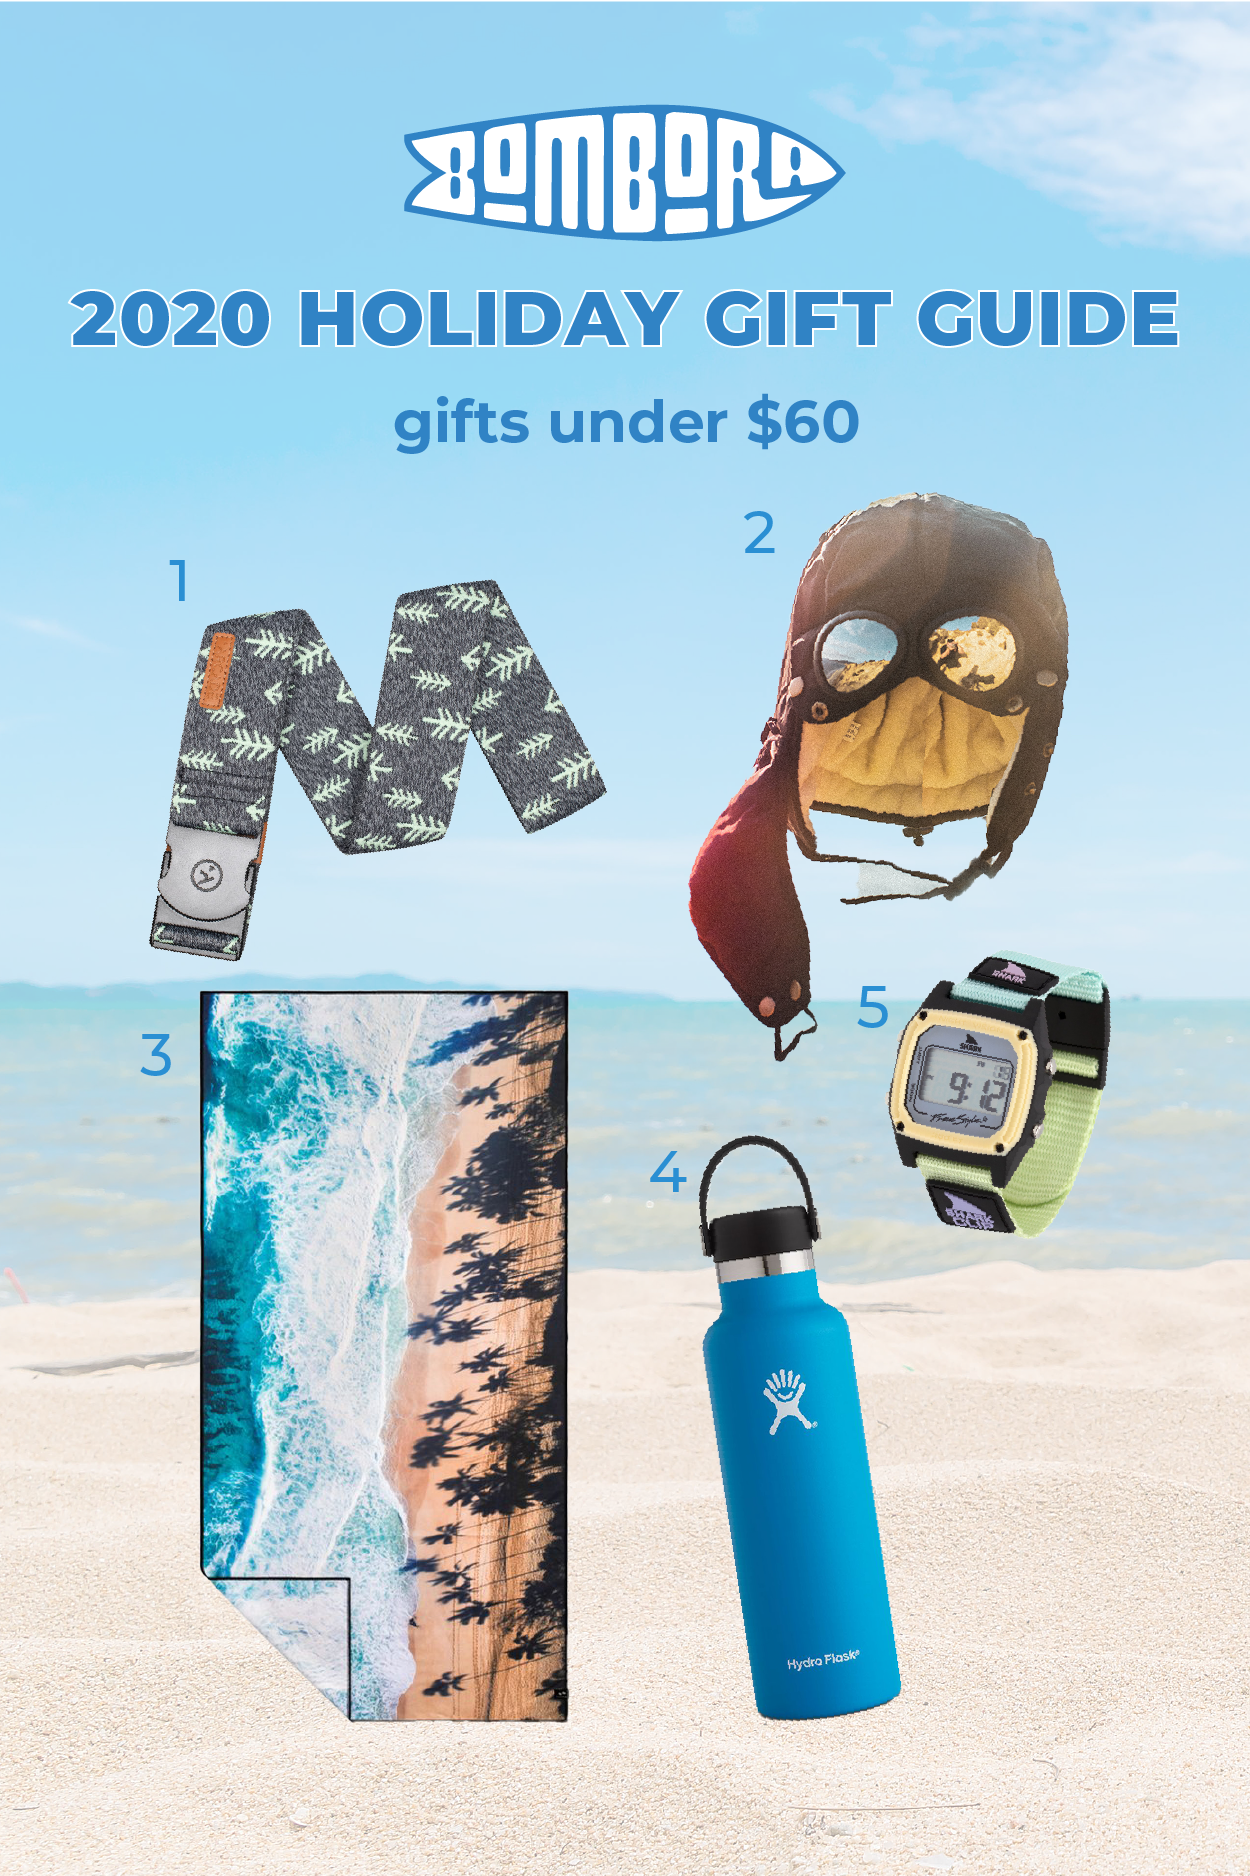 Holiday gift guide 2020 gifts under $60. Arcade belt. Gimbal God Funguy hat. Slowtide quick dry travel towel. Hydroflask water bottle. Freestyle Shark classic Y2k clip watch.